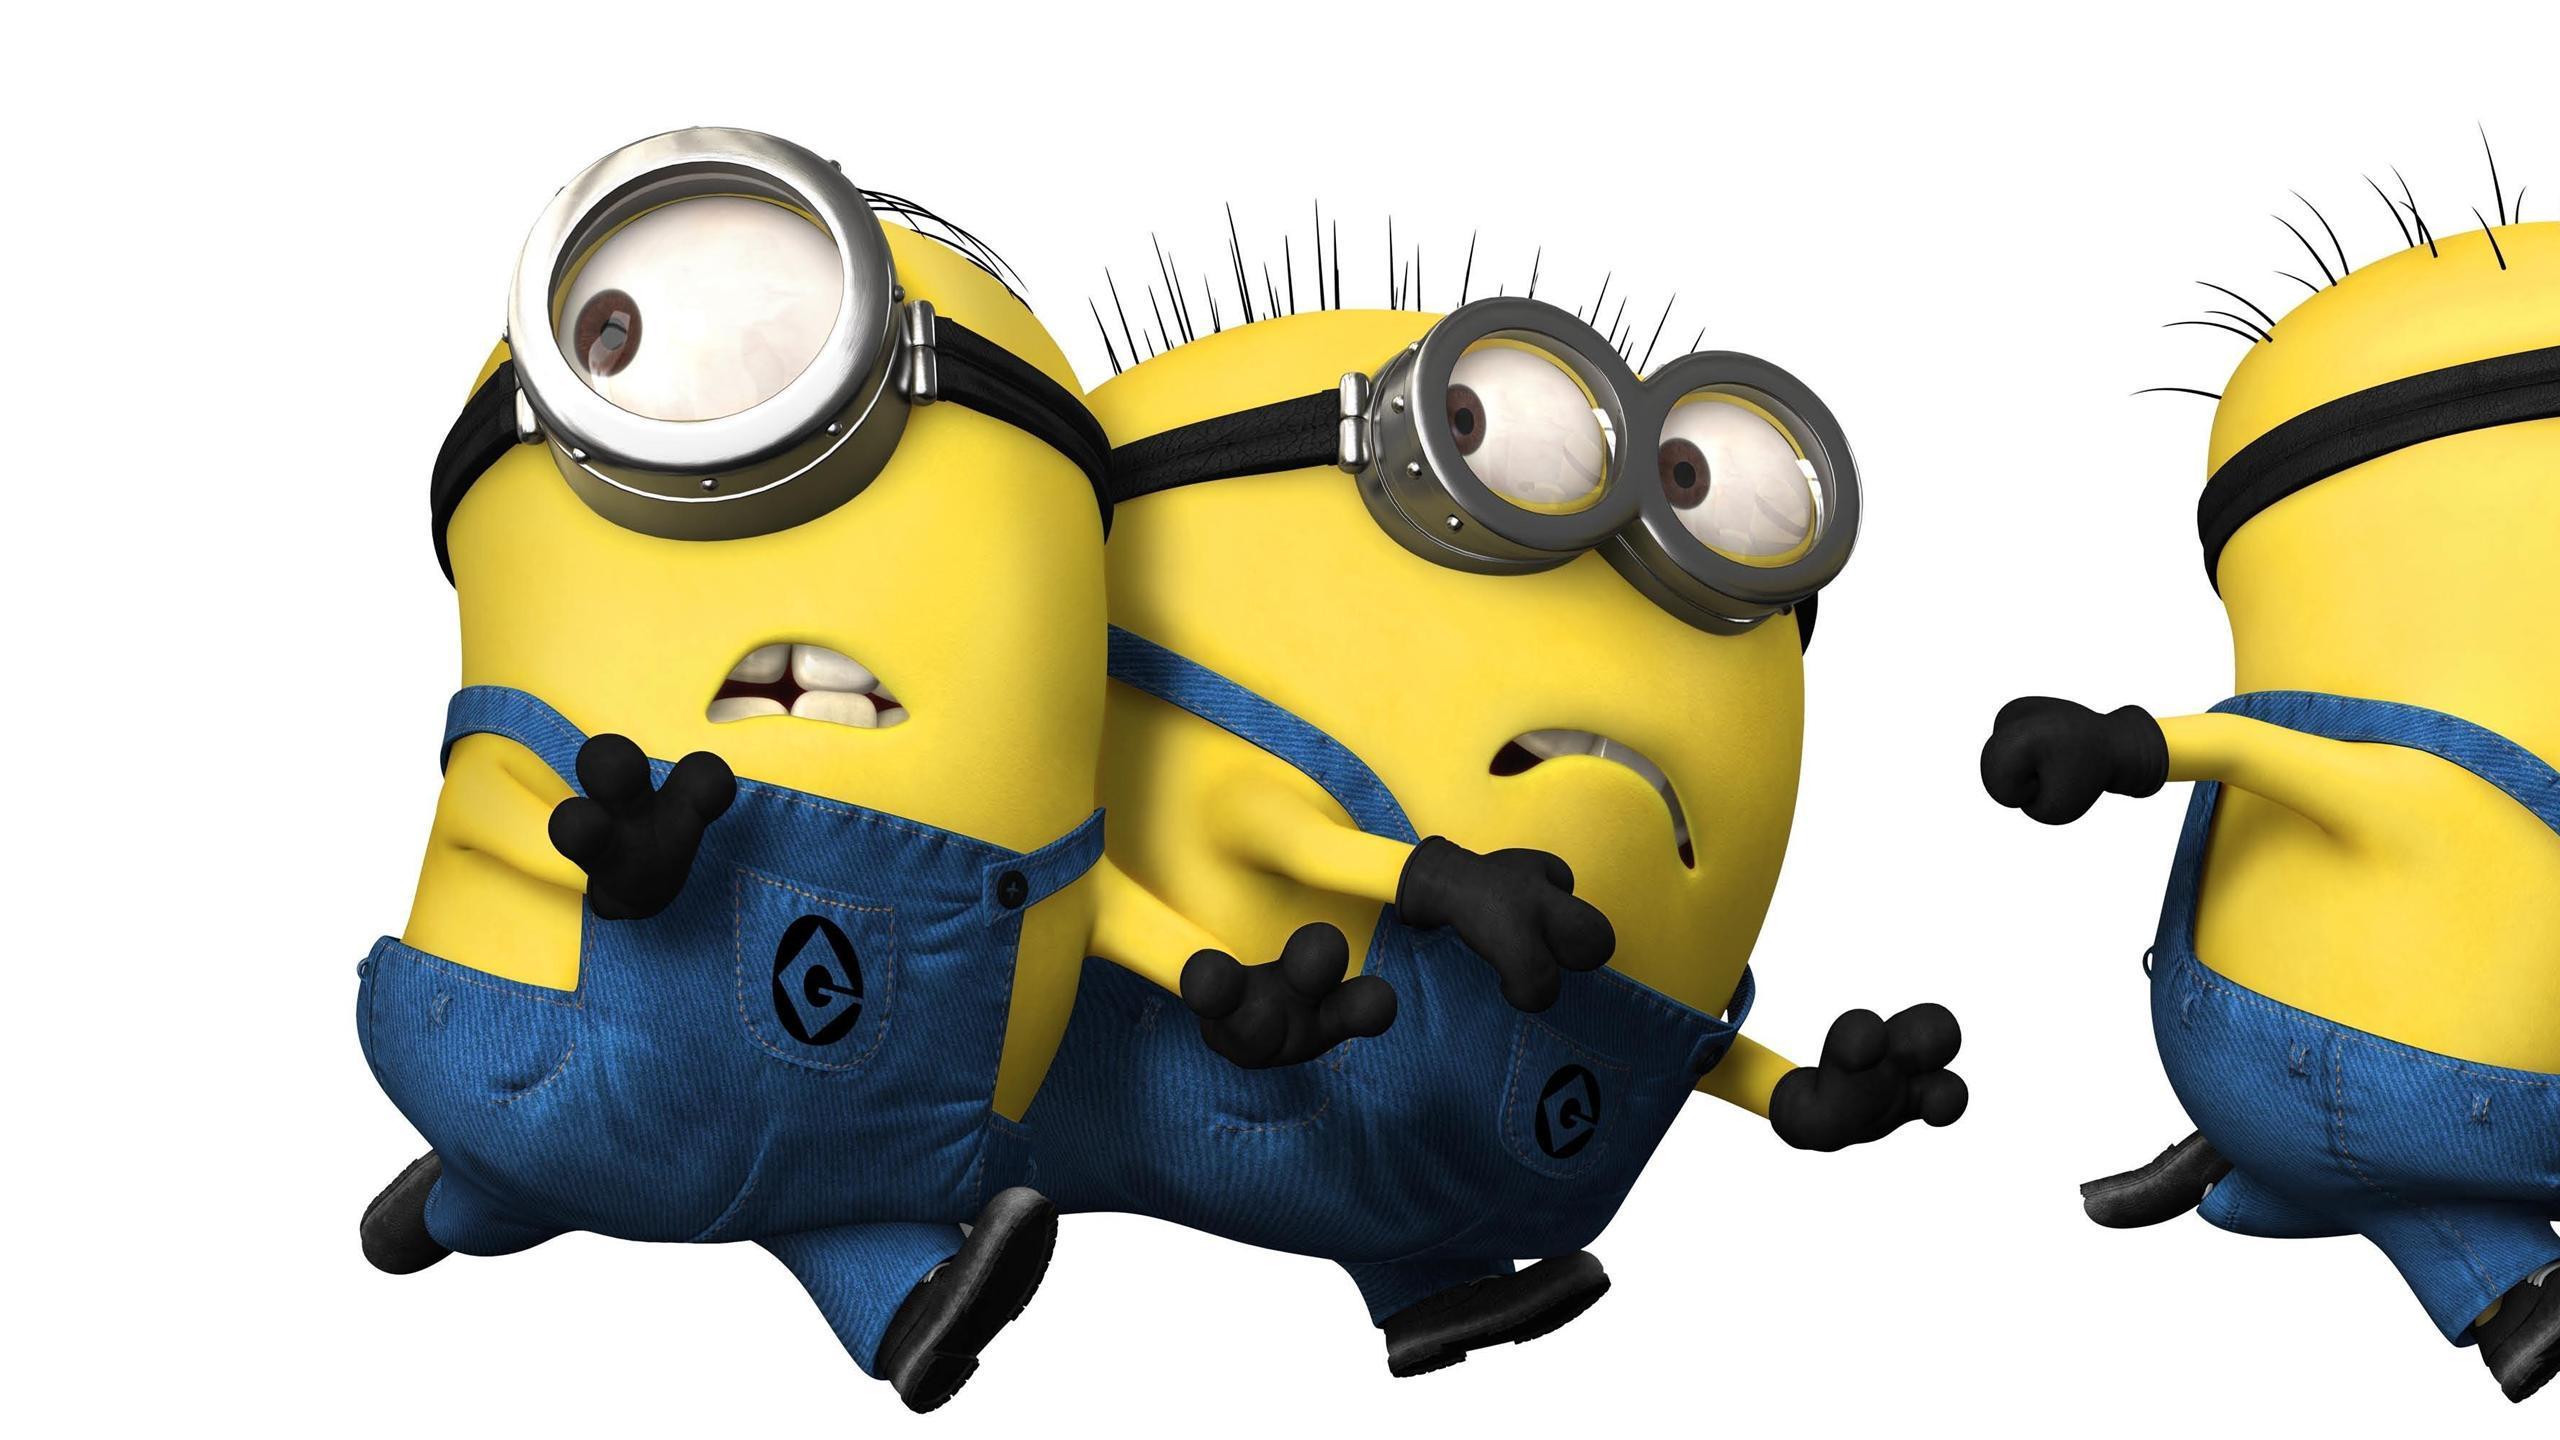 Dispicable Me 2 Movies Wallpaper Windows